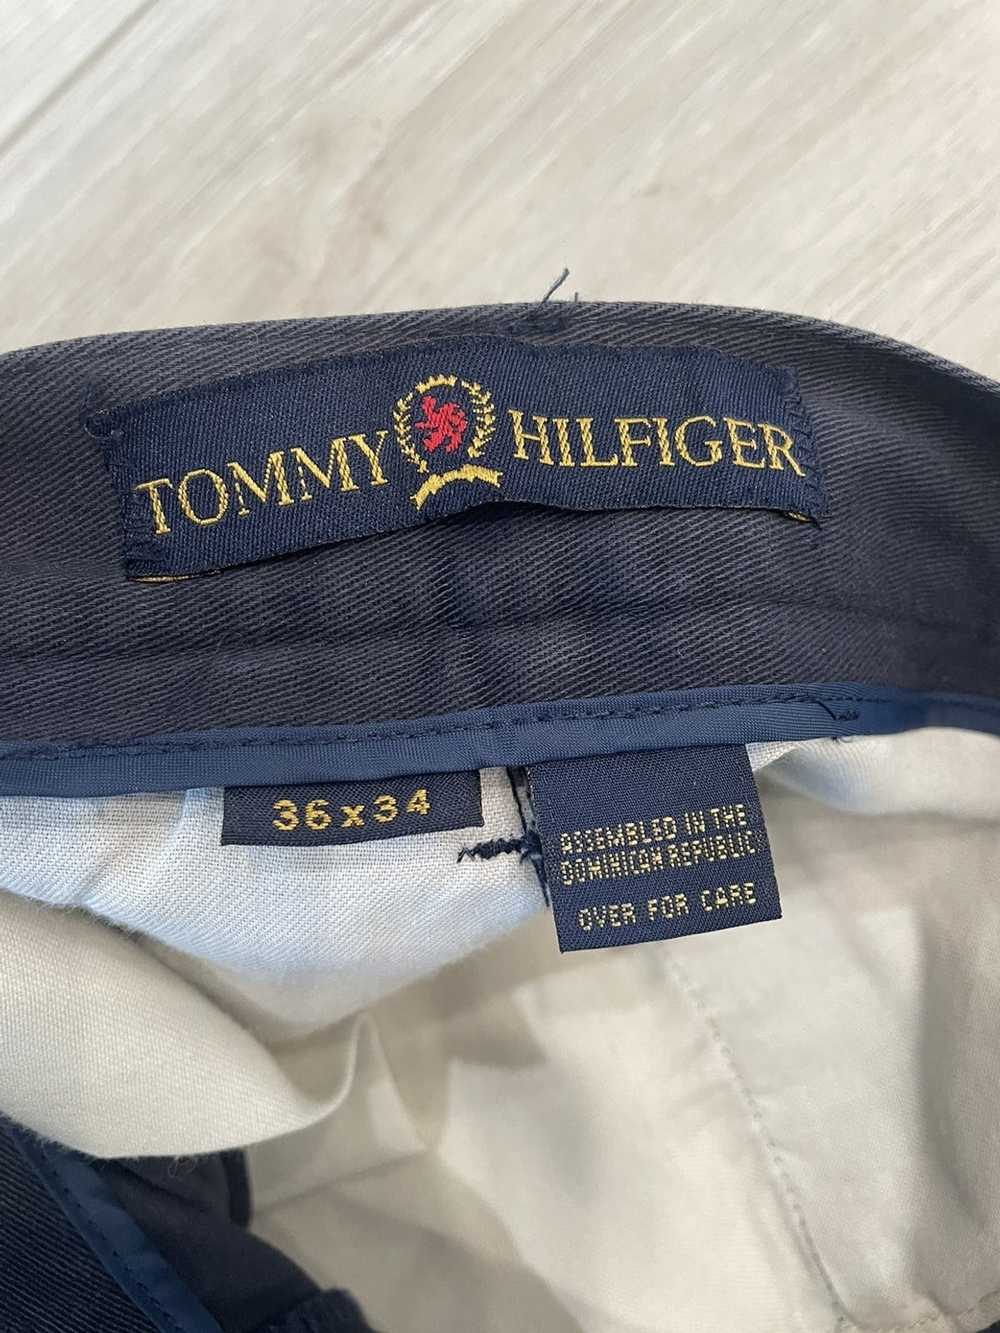 Tommy Hilfiger Tommy Hilfiger Trousers Navy - image 4